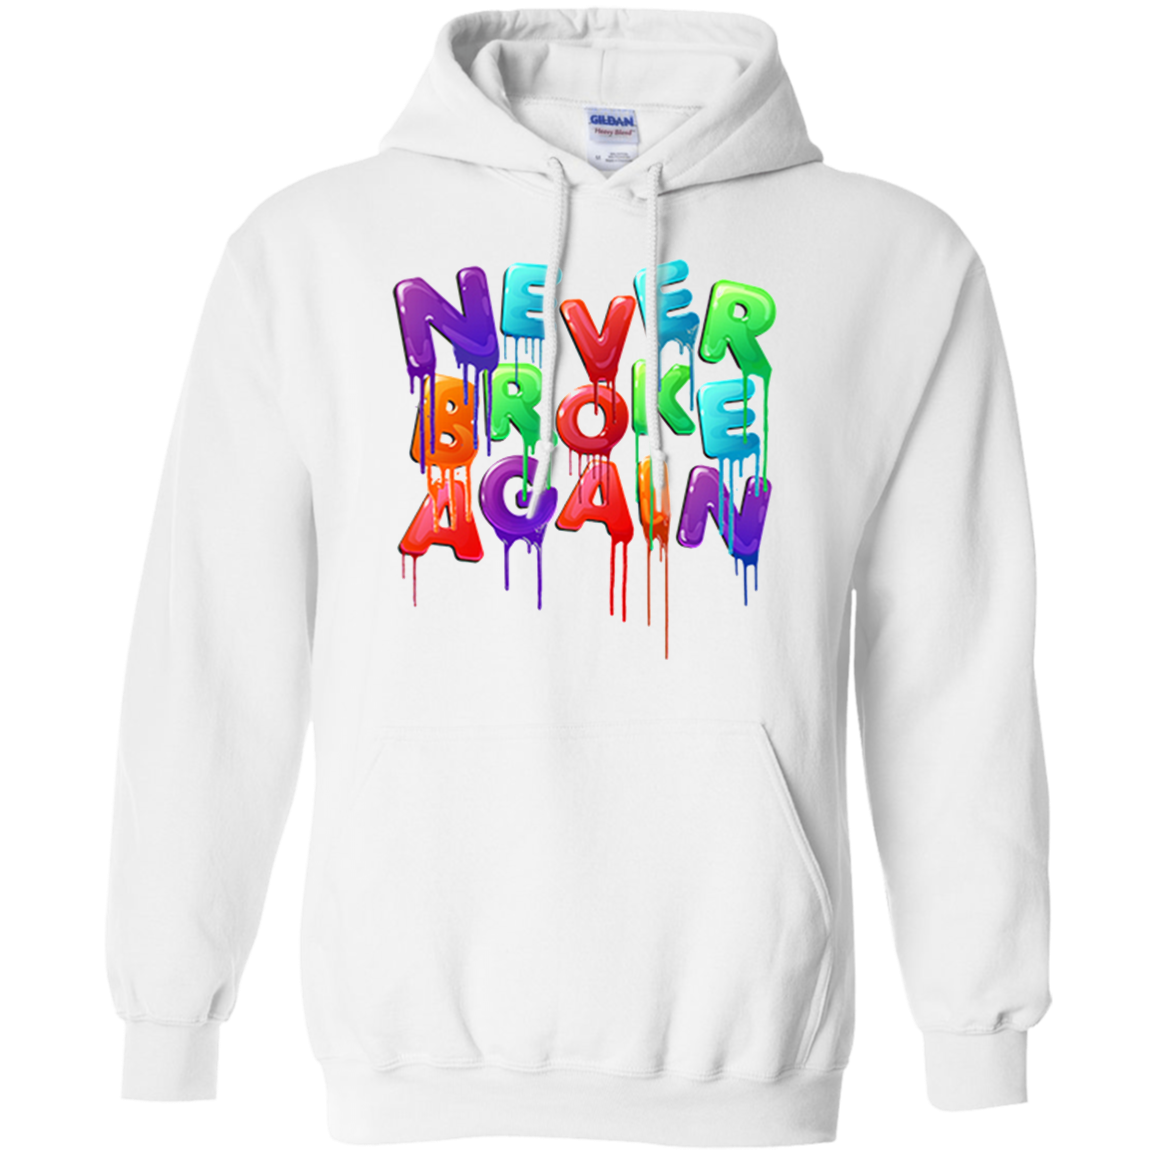 youngboy never broke again sweater